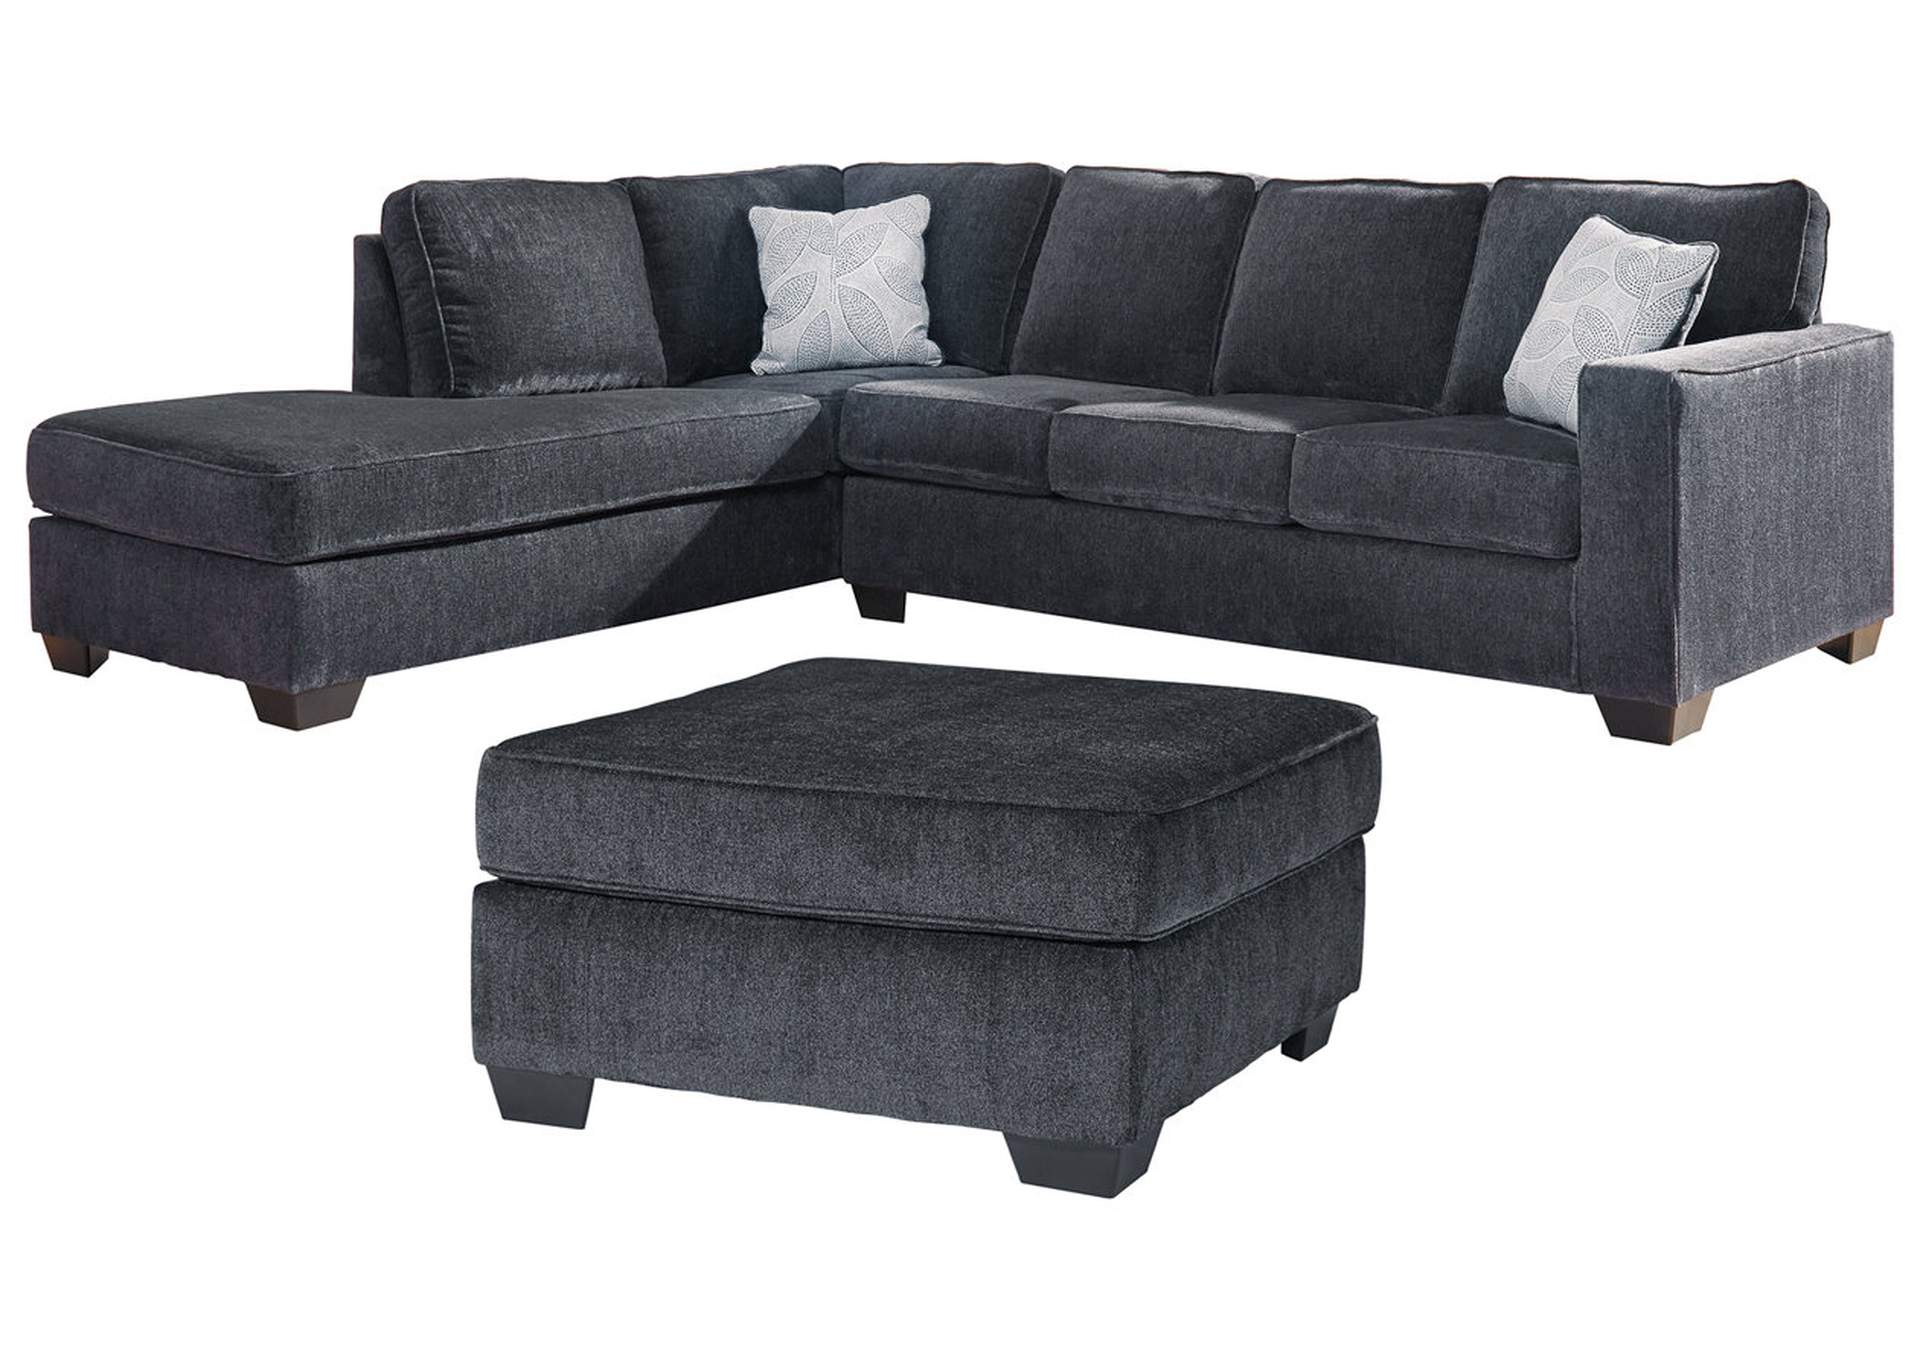 Altari 2-Piece Sleeper Sectional with Ottoman,Signature Design By Ashley